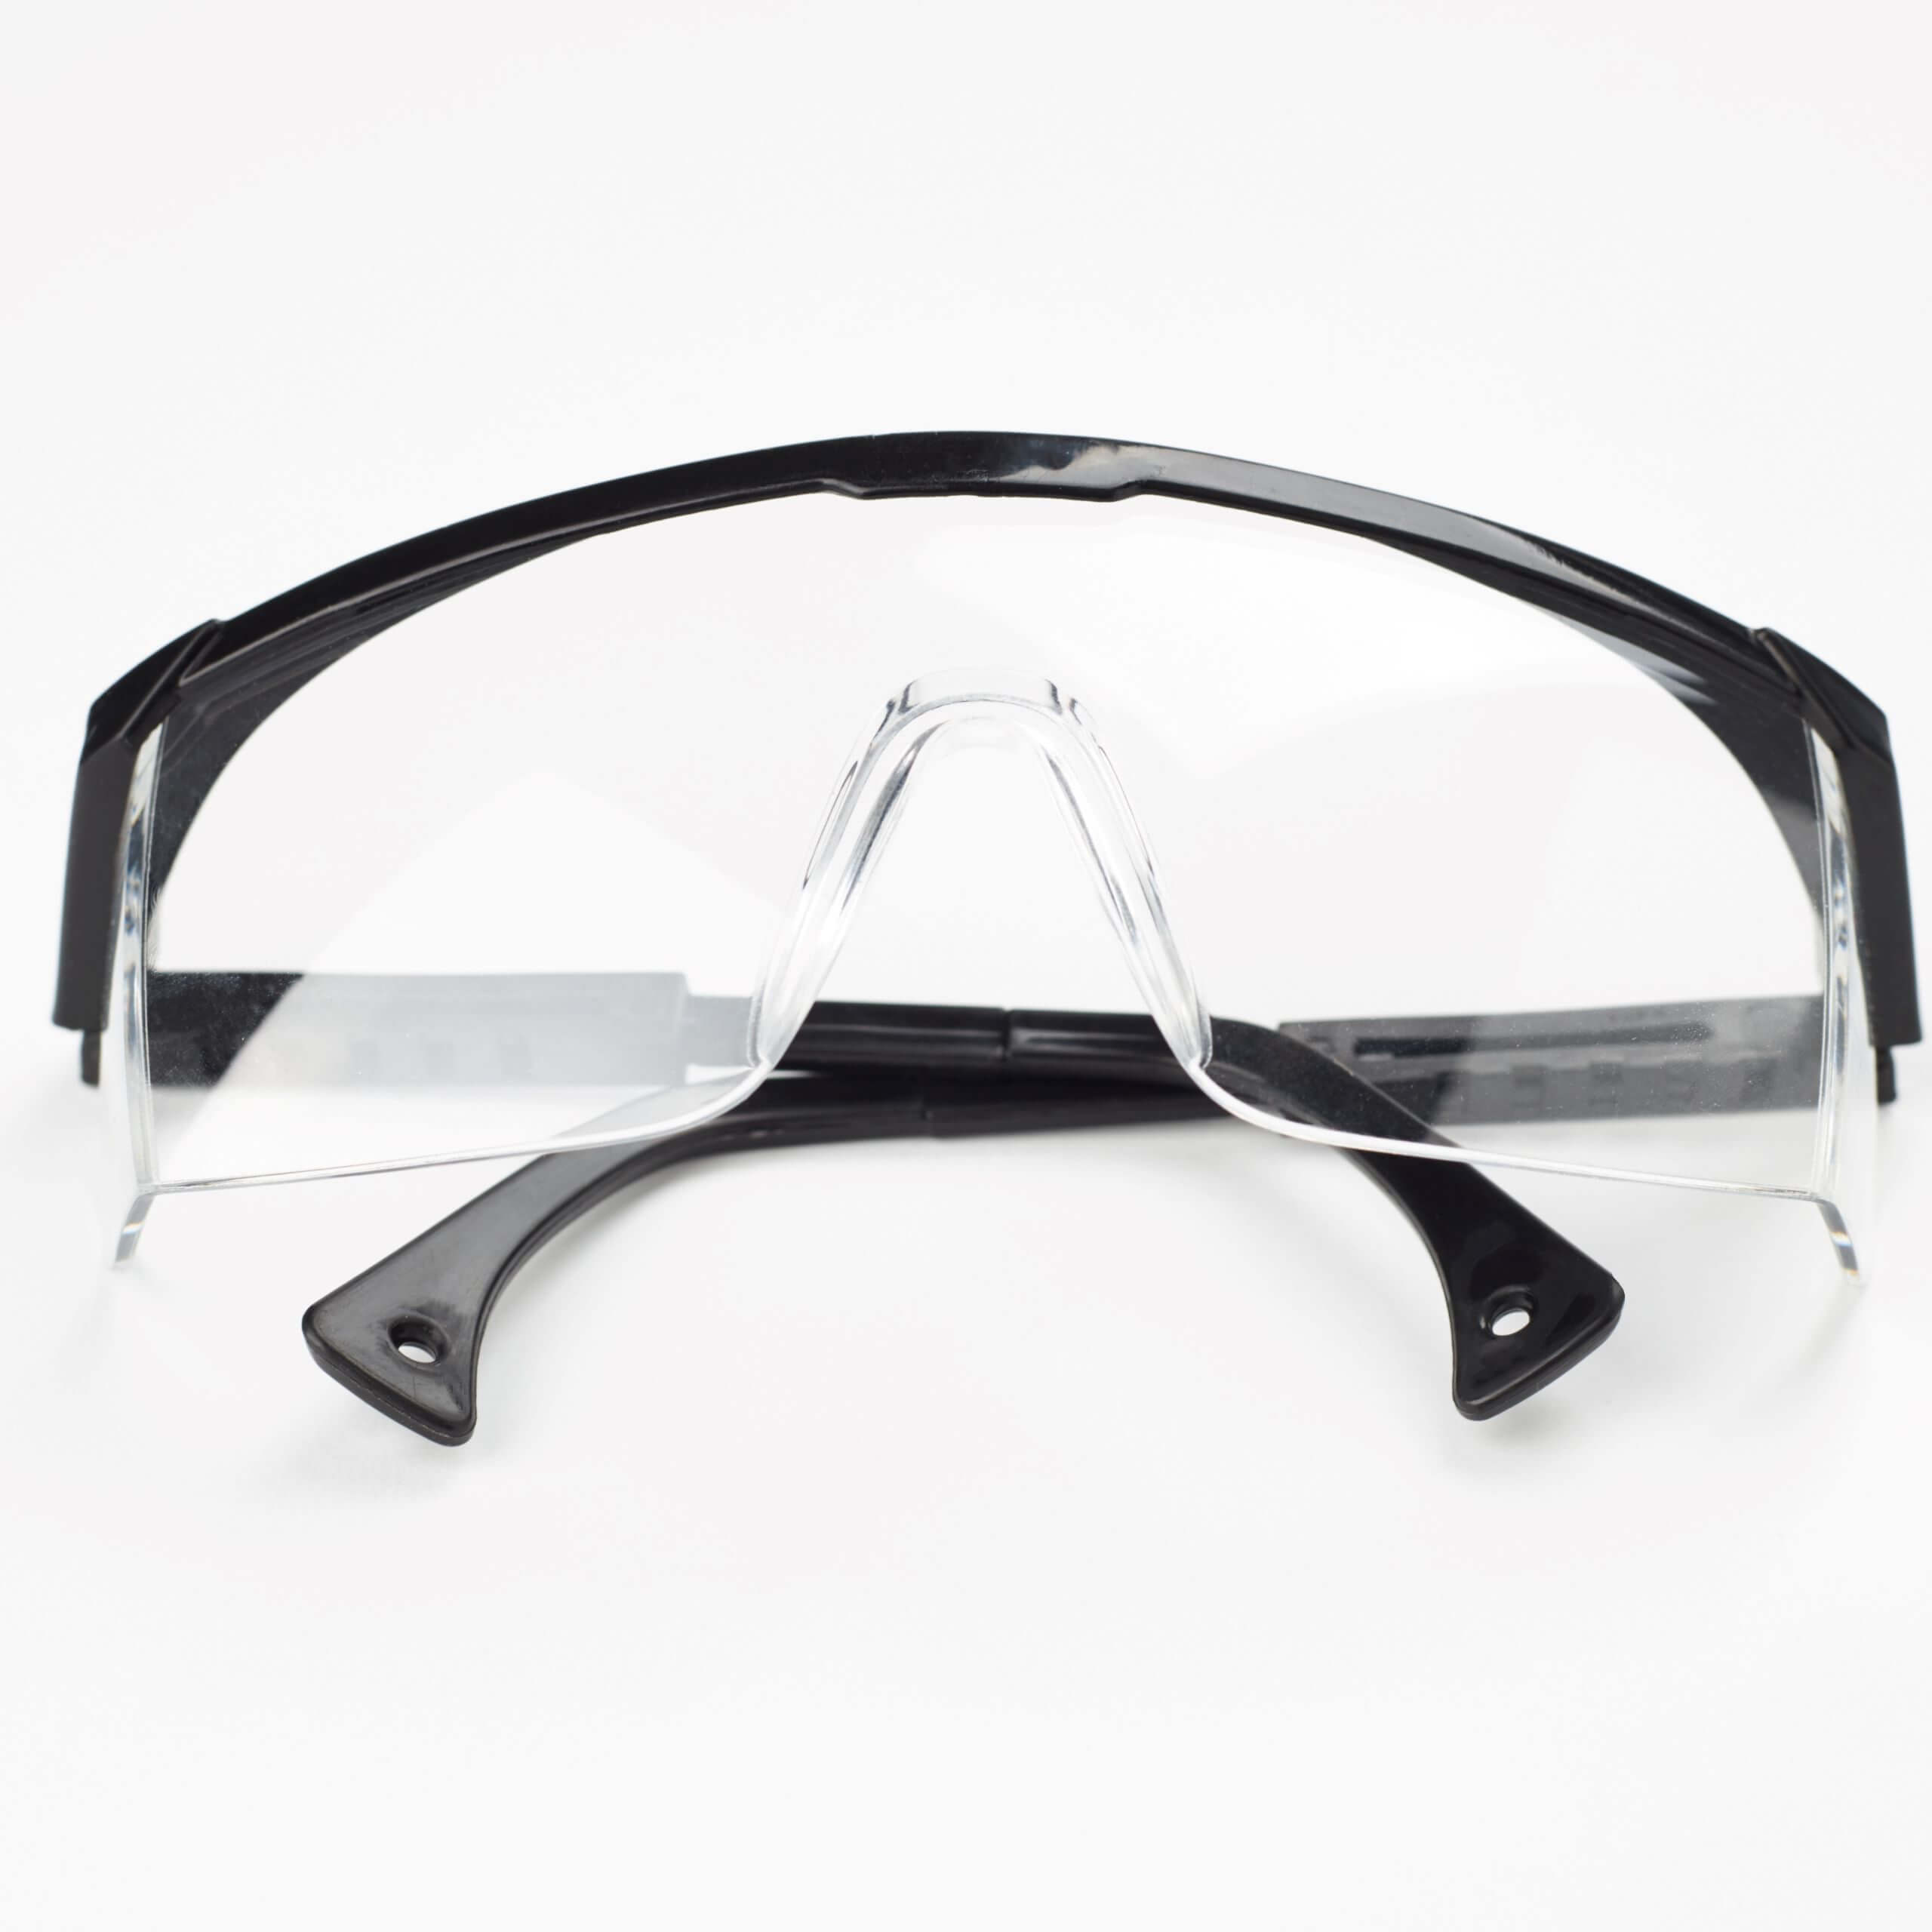 An image of Industrial Safety Goggles.